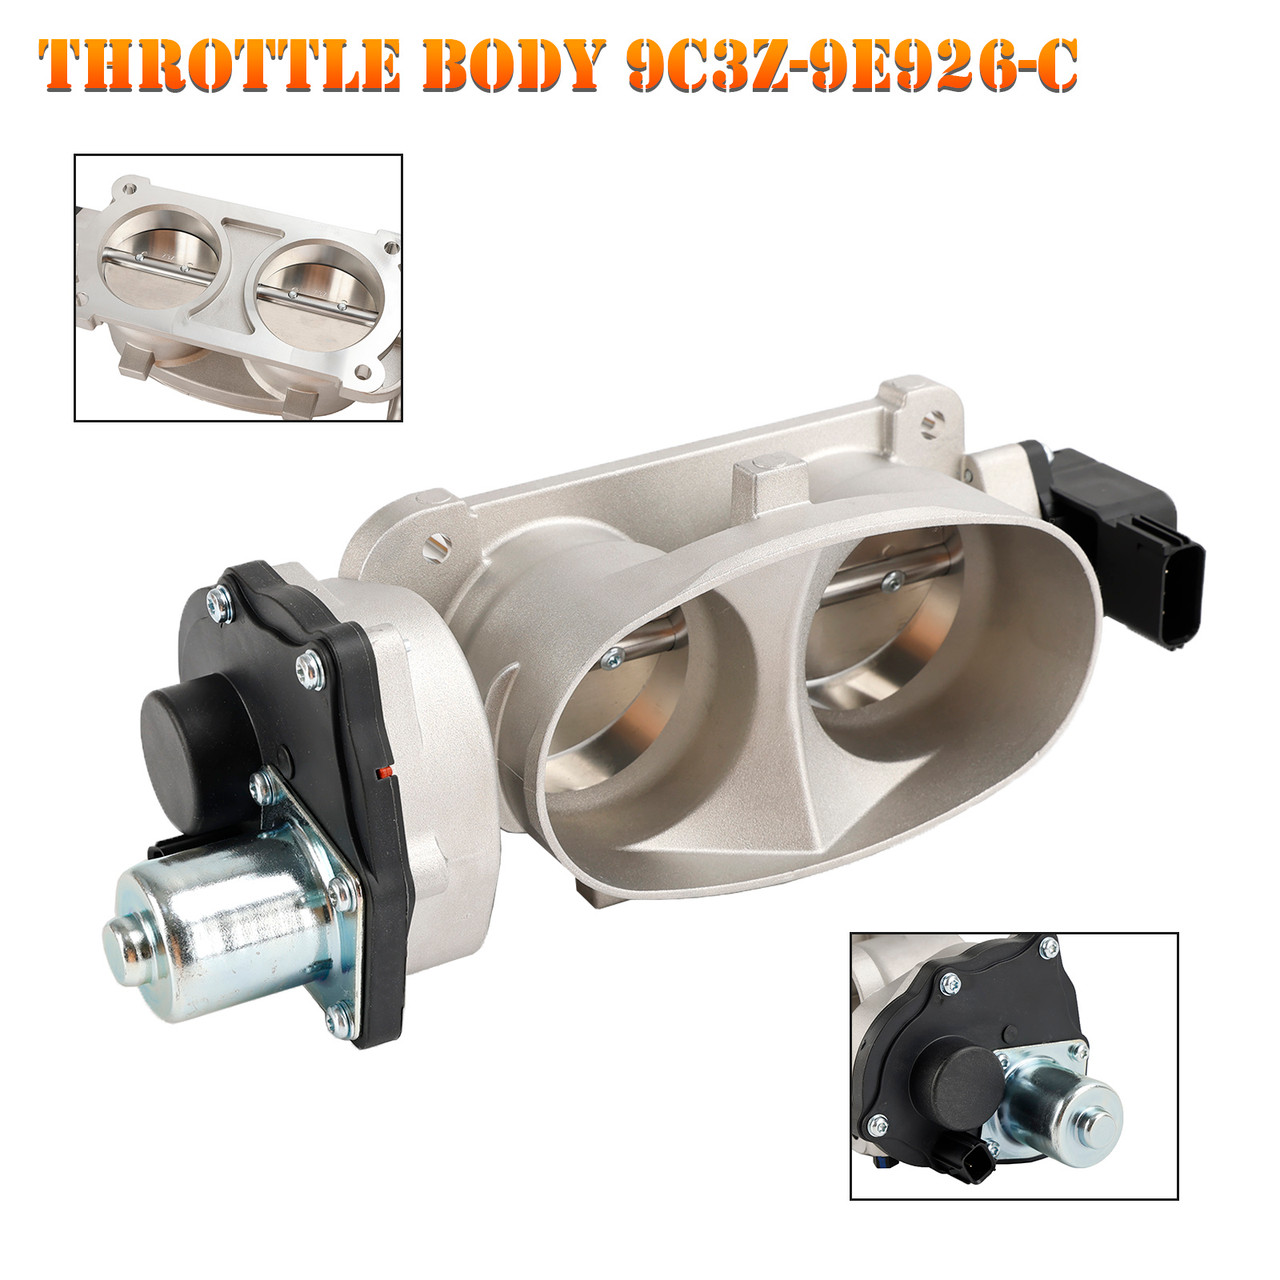 Throttle Body 9C3Z-9E926-C For Ford F-250 Mustang Excursion 5.4L 5.8L 6.8L